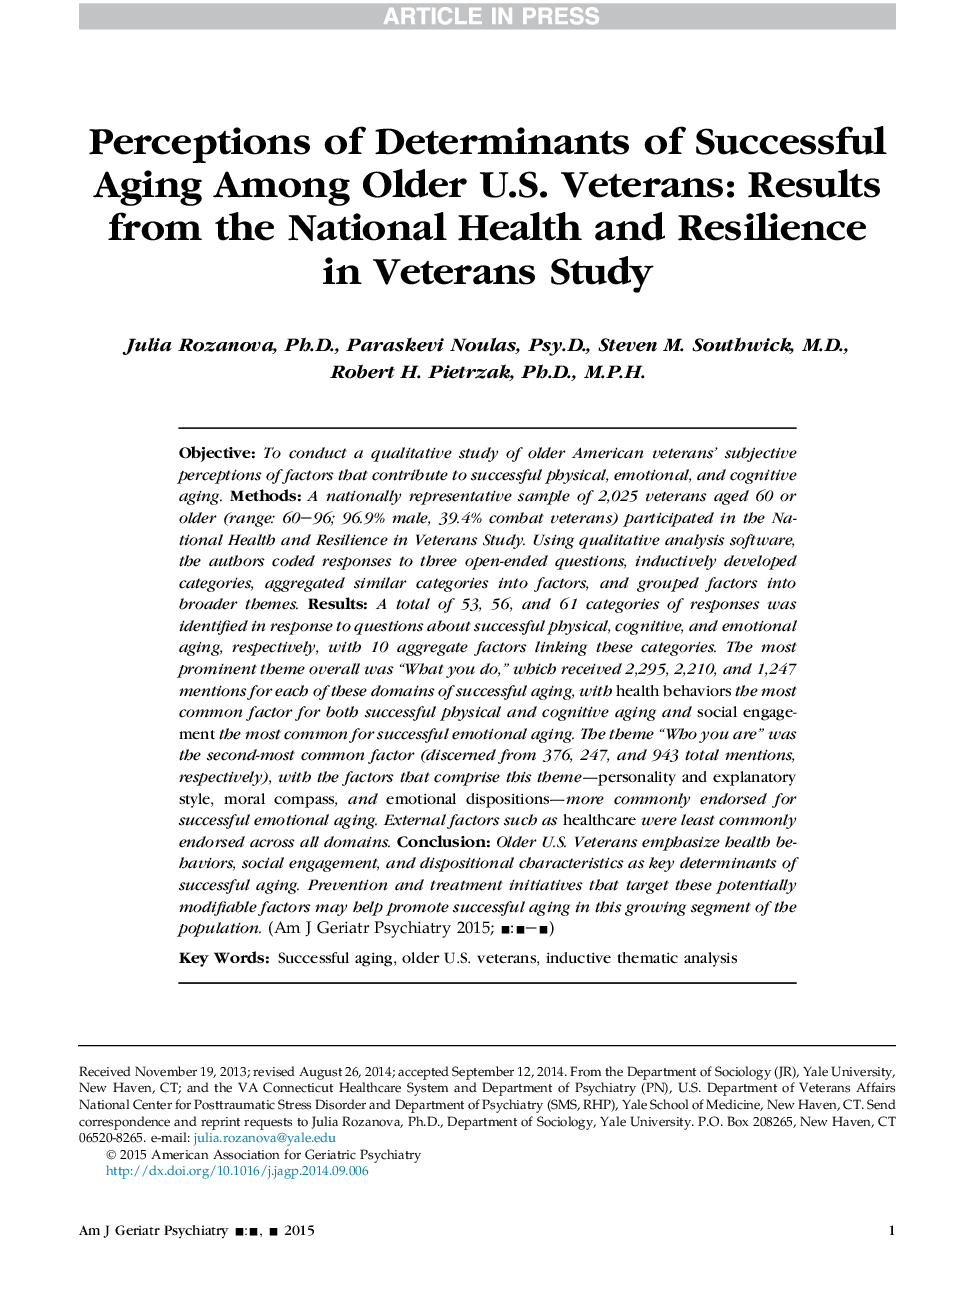 Perceptions of Determinants of Successful Aging Among Older U.S. Veterans: Results from the National Health and Resilience inÂ Veterans Study